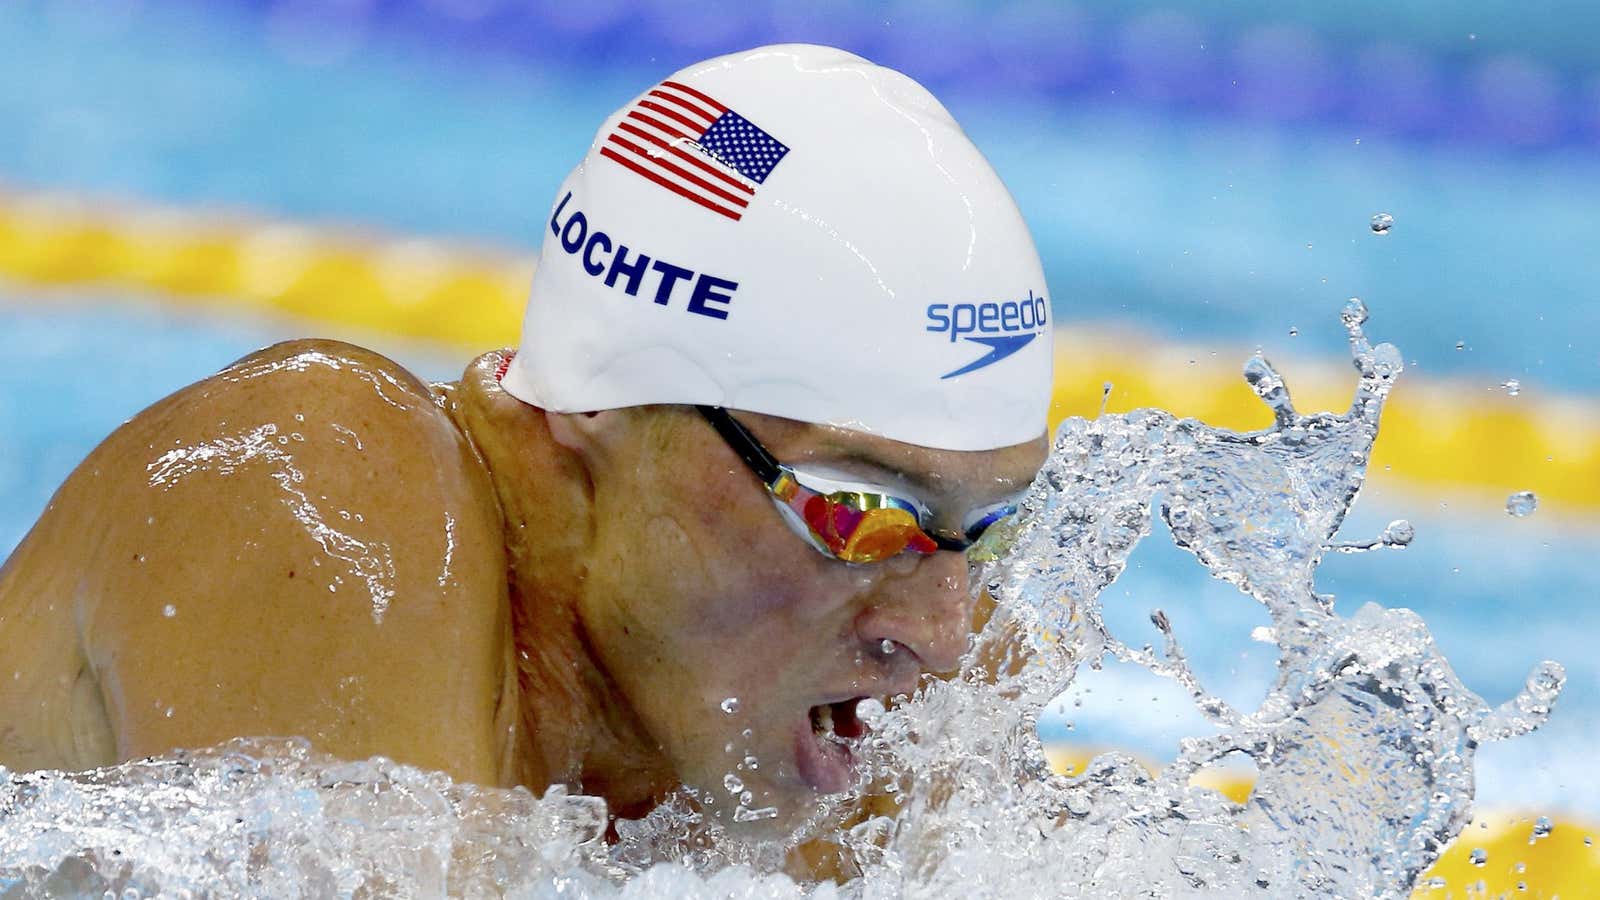 Speedo is saying goodbye to its deal with Lochte.